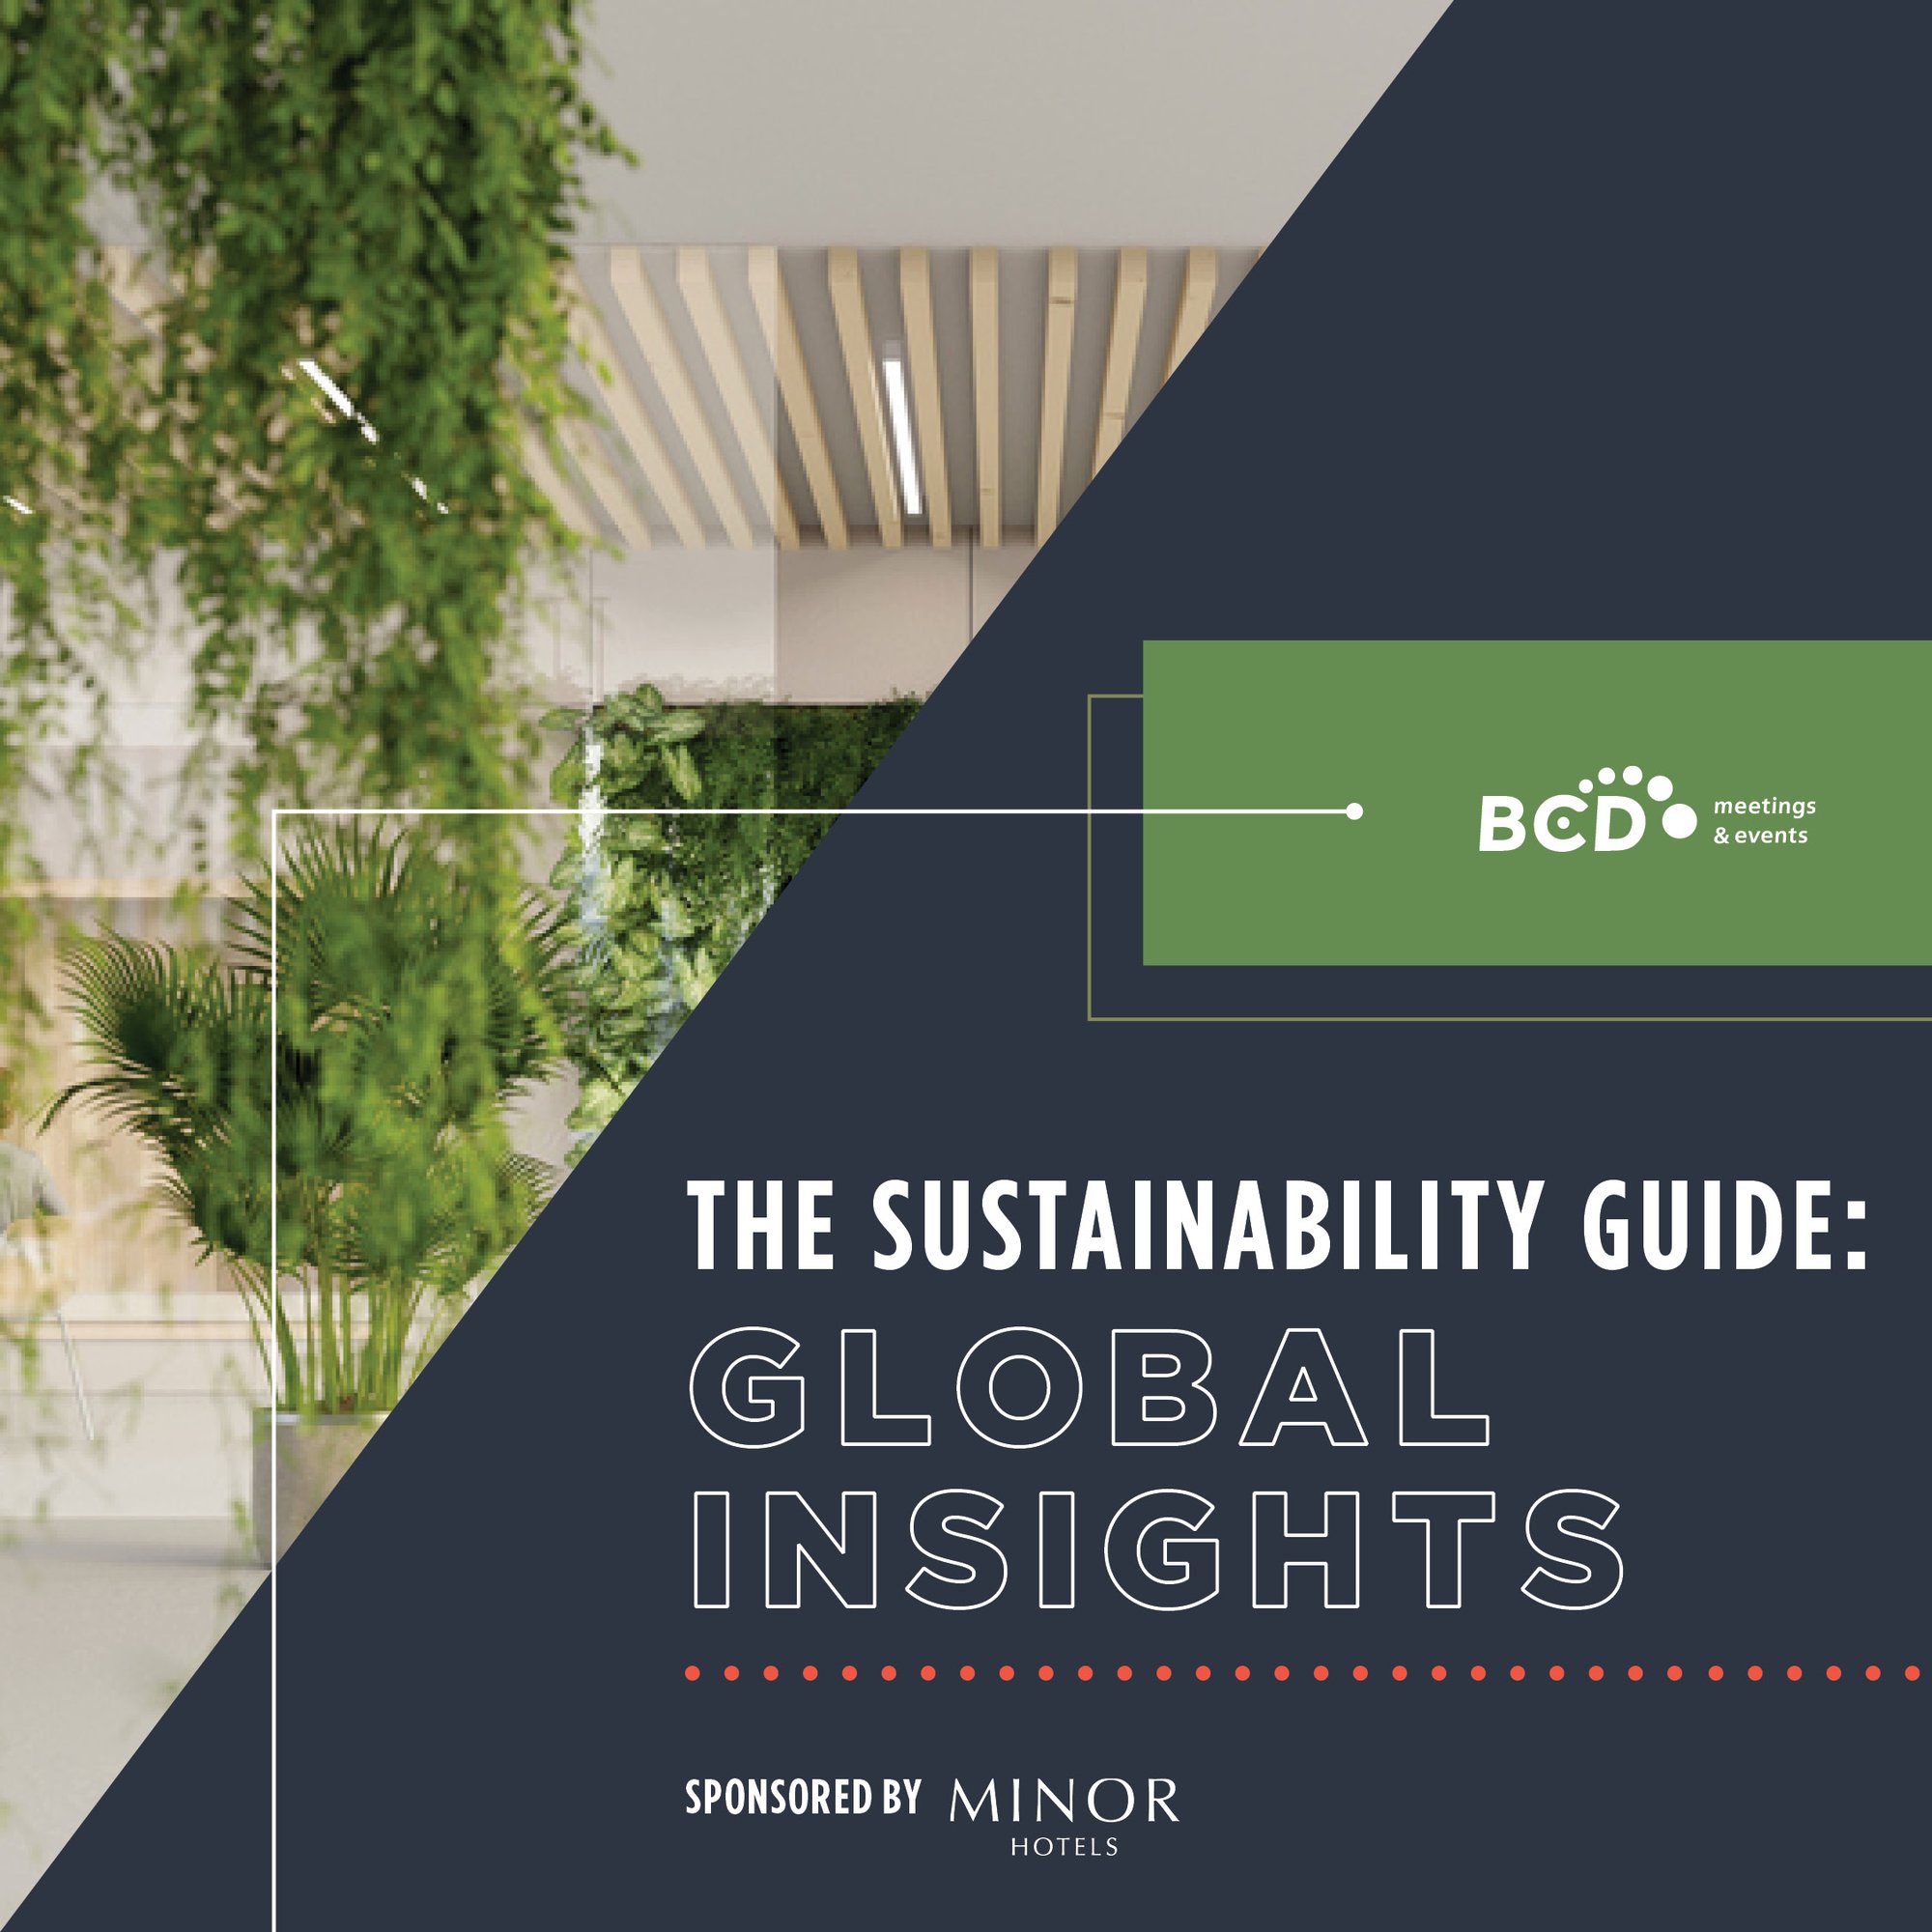 NEW_The Sustainability Guide Global Insights_Static Instagram Graphic 1080x1080